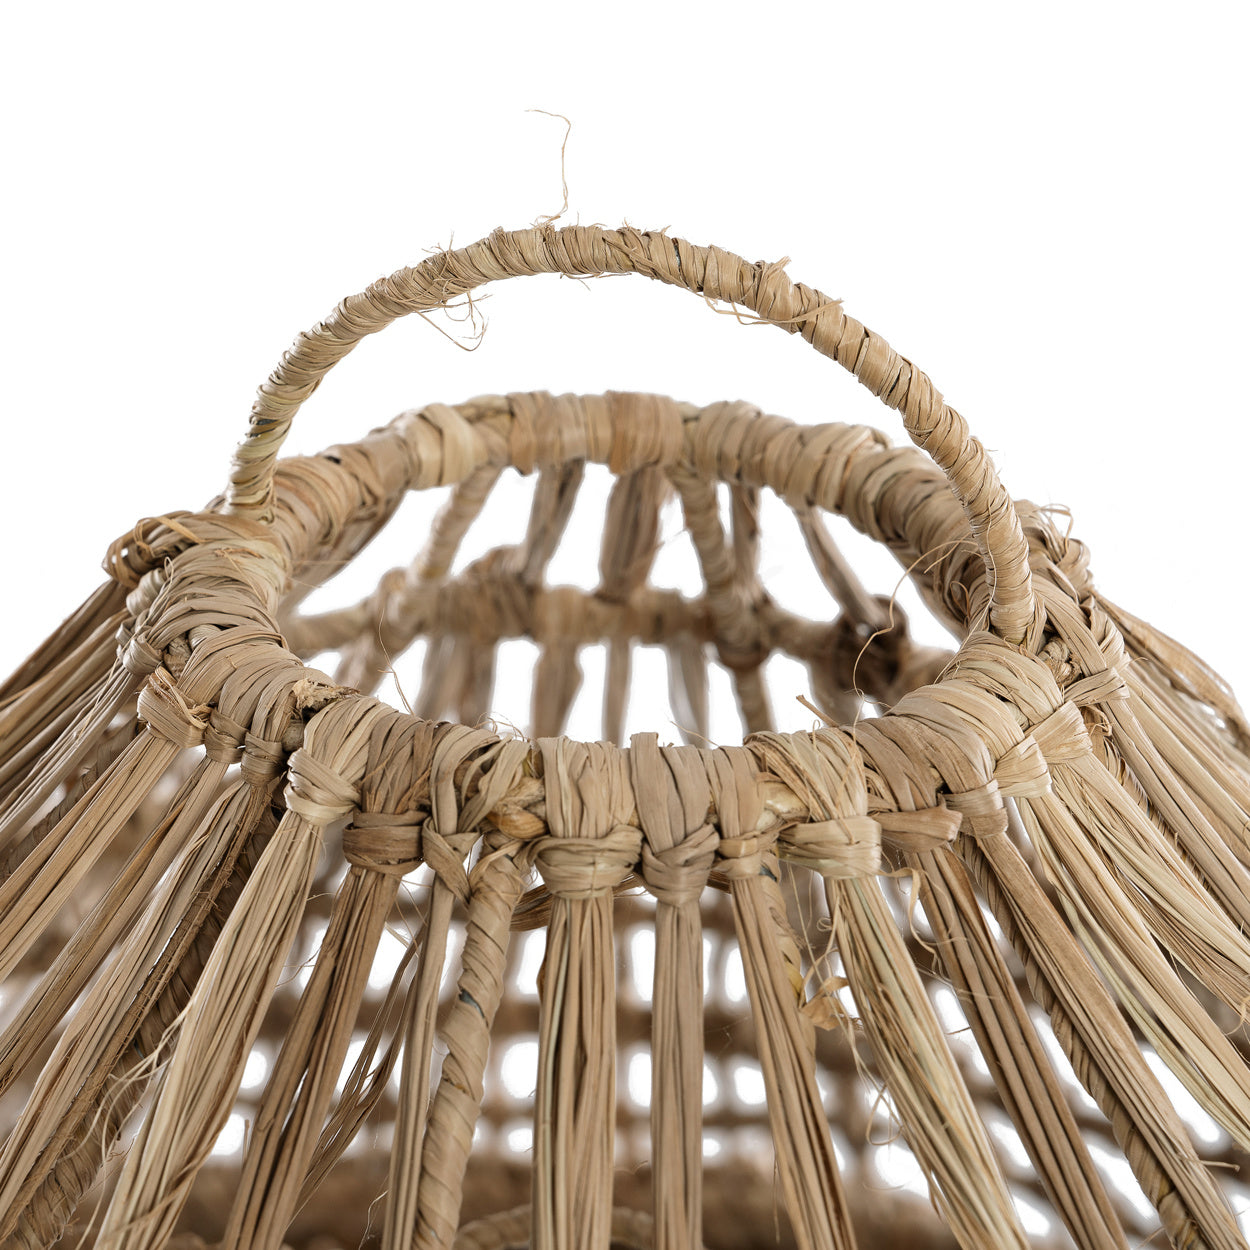 THE SUMMER VIBES Pendant Lamp - Natural Top